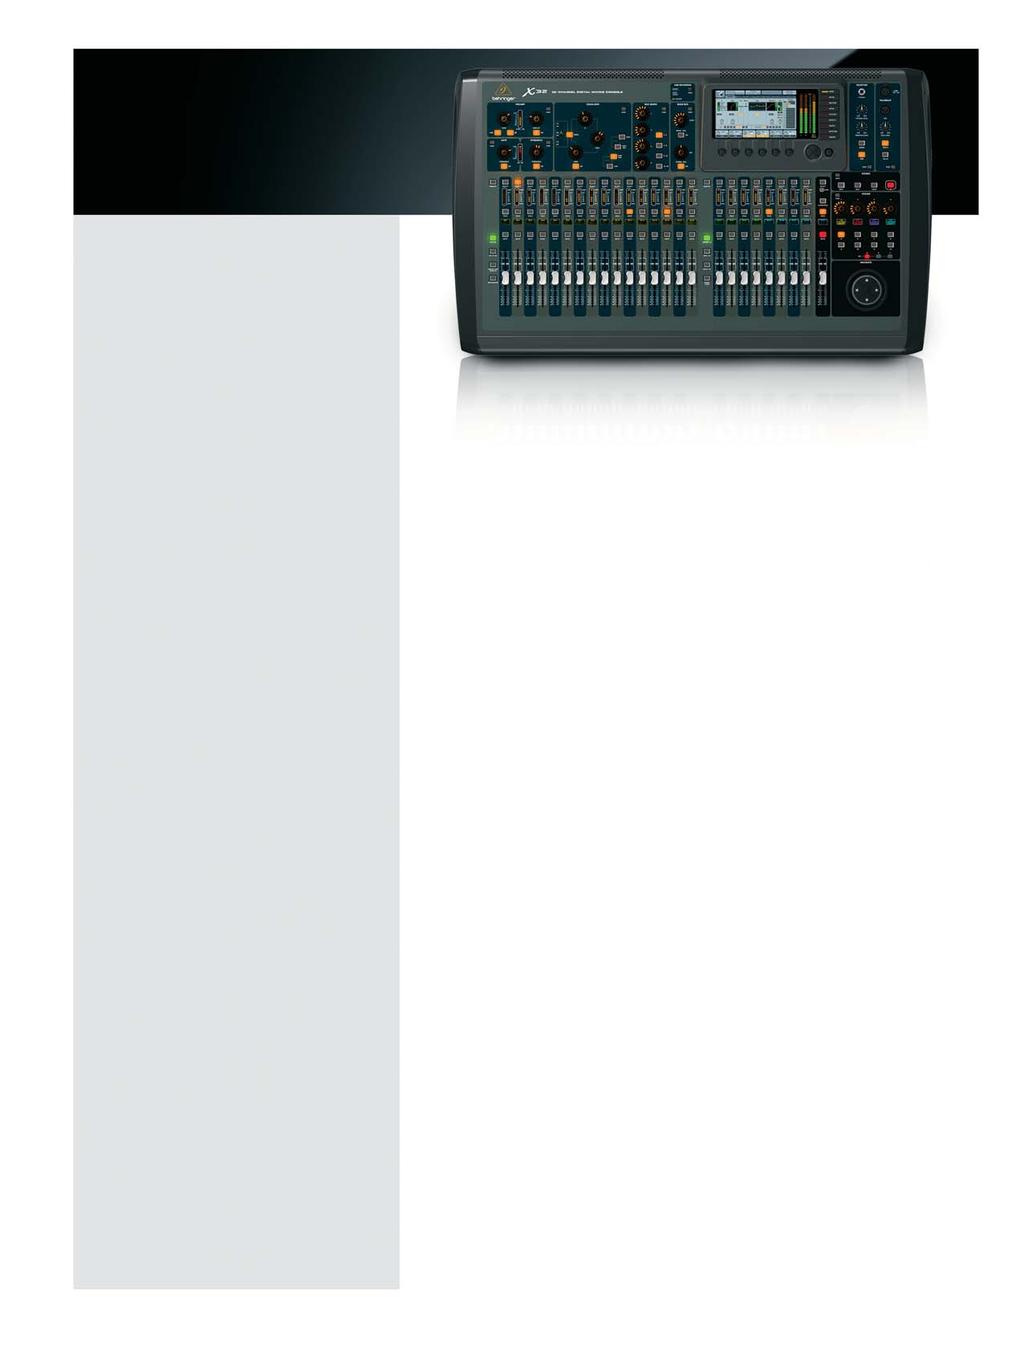 Digital Mixers Flagship 32 Channel Digital Mixing Console for Live FOH, Monitor and Recording Applications.